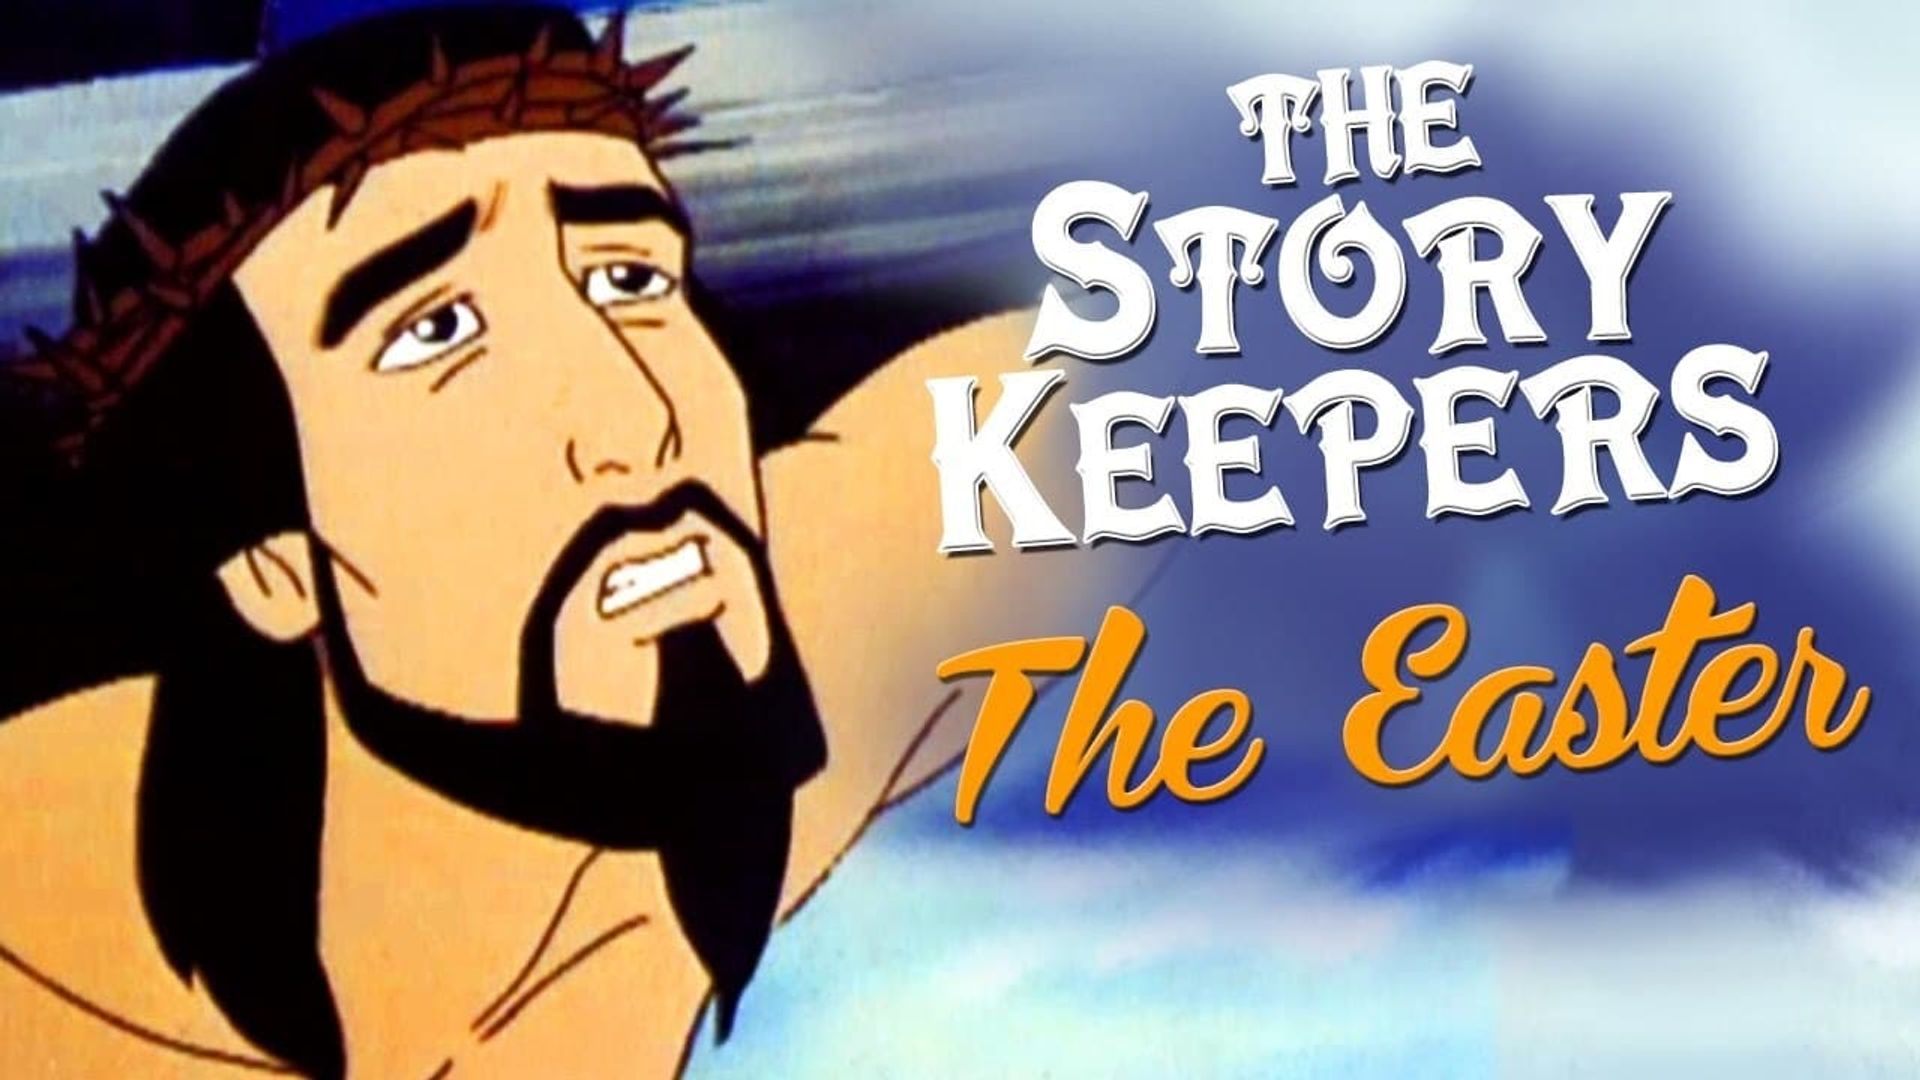 The Easter Story Keepers background